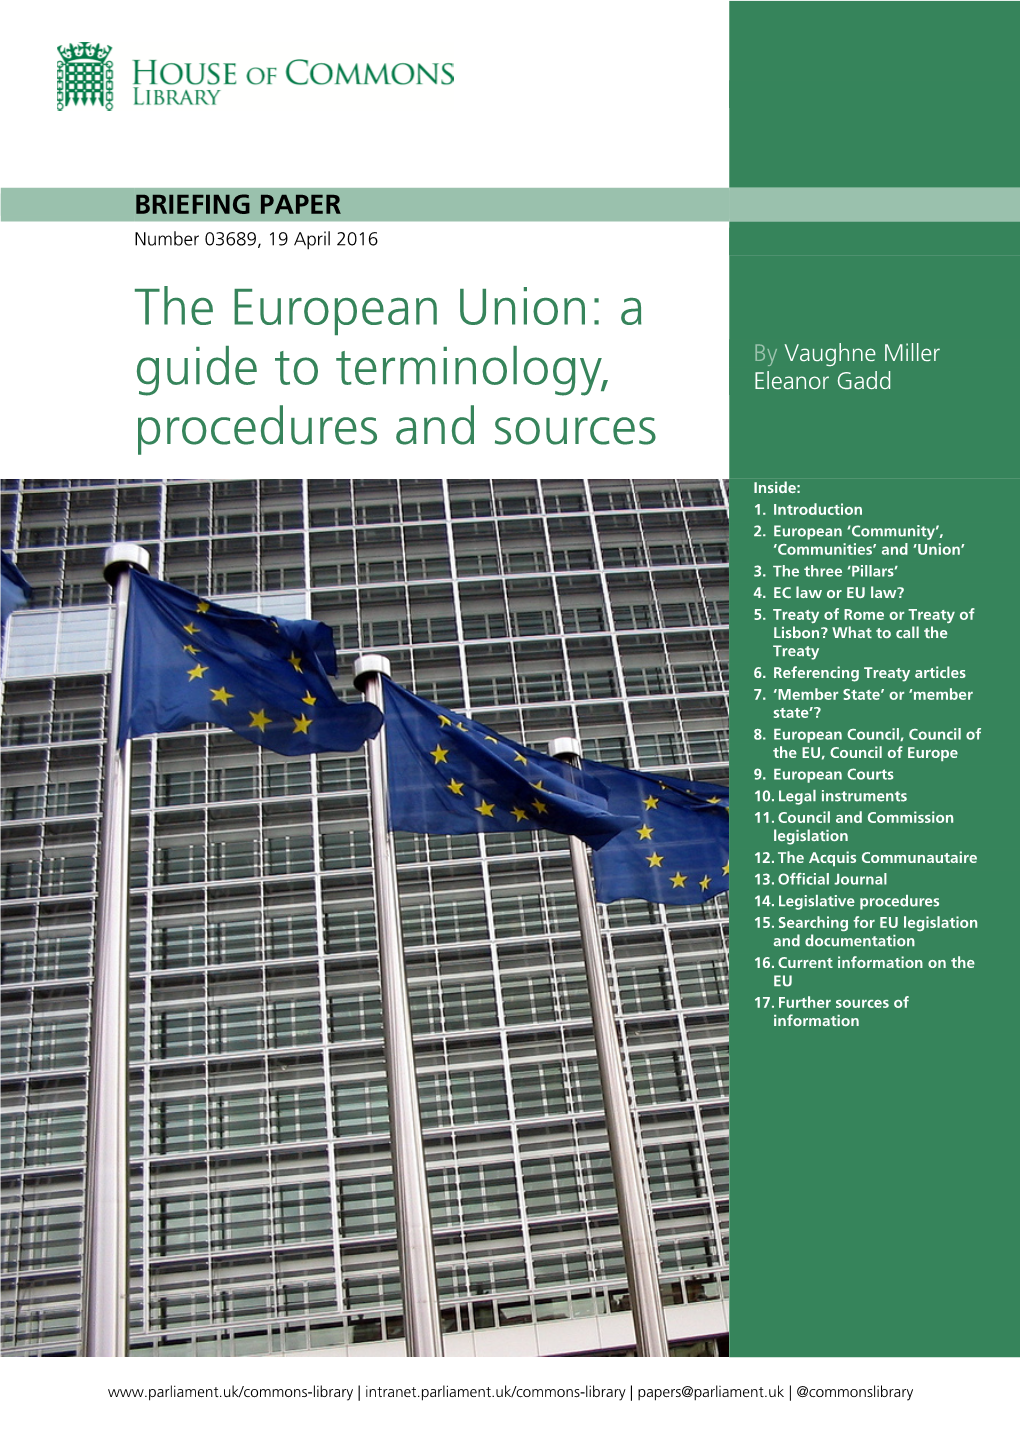 The European Union: a Guide to Terminology, Procedures and Sources